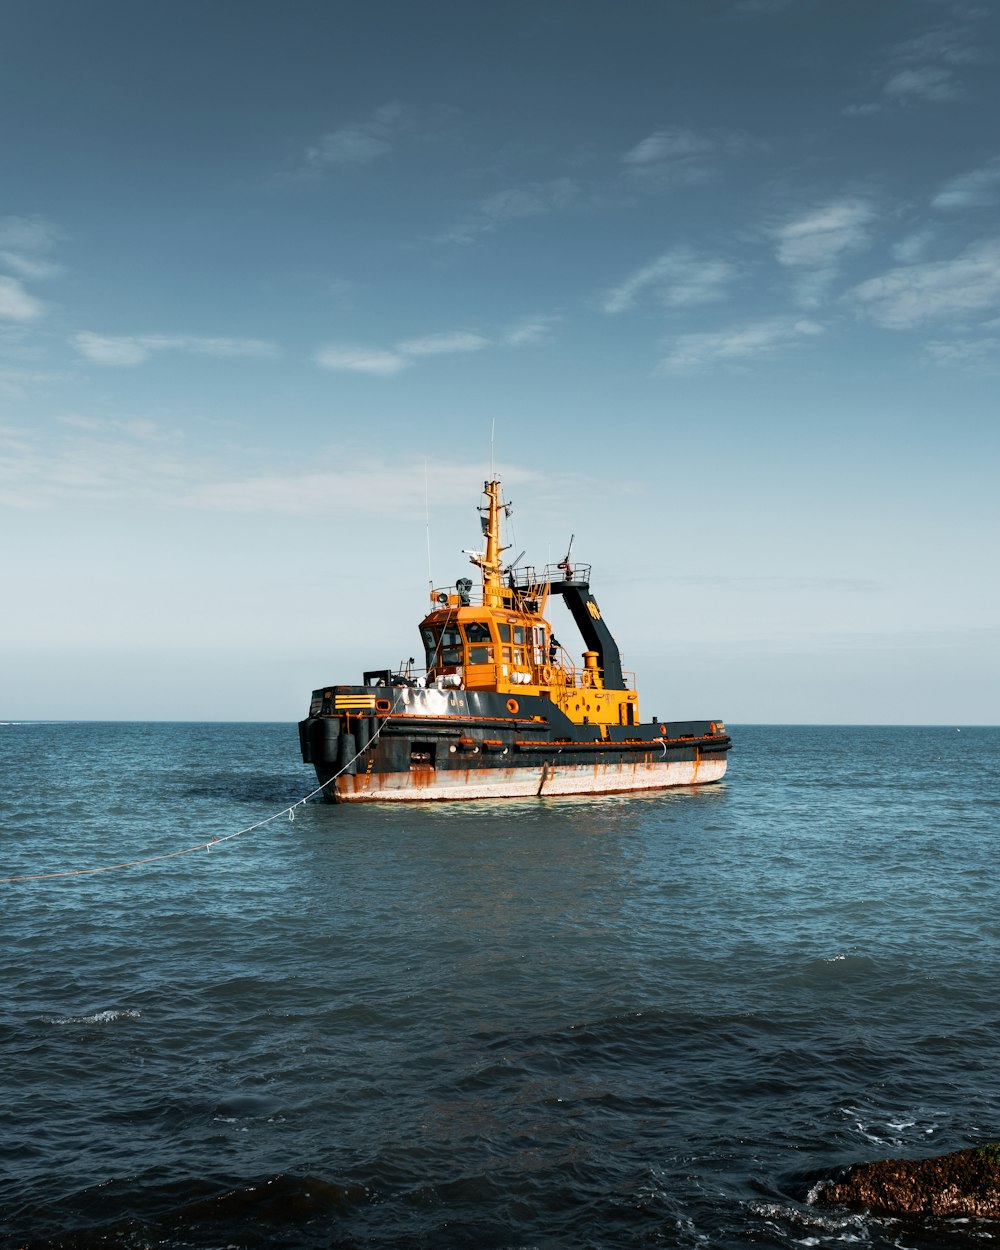 black-and-yellow tugboat on calm water during daytime